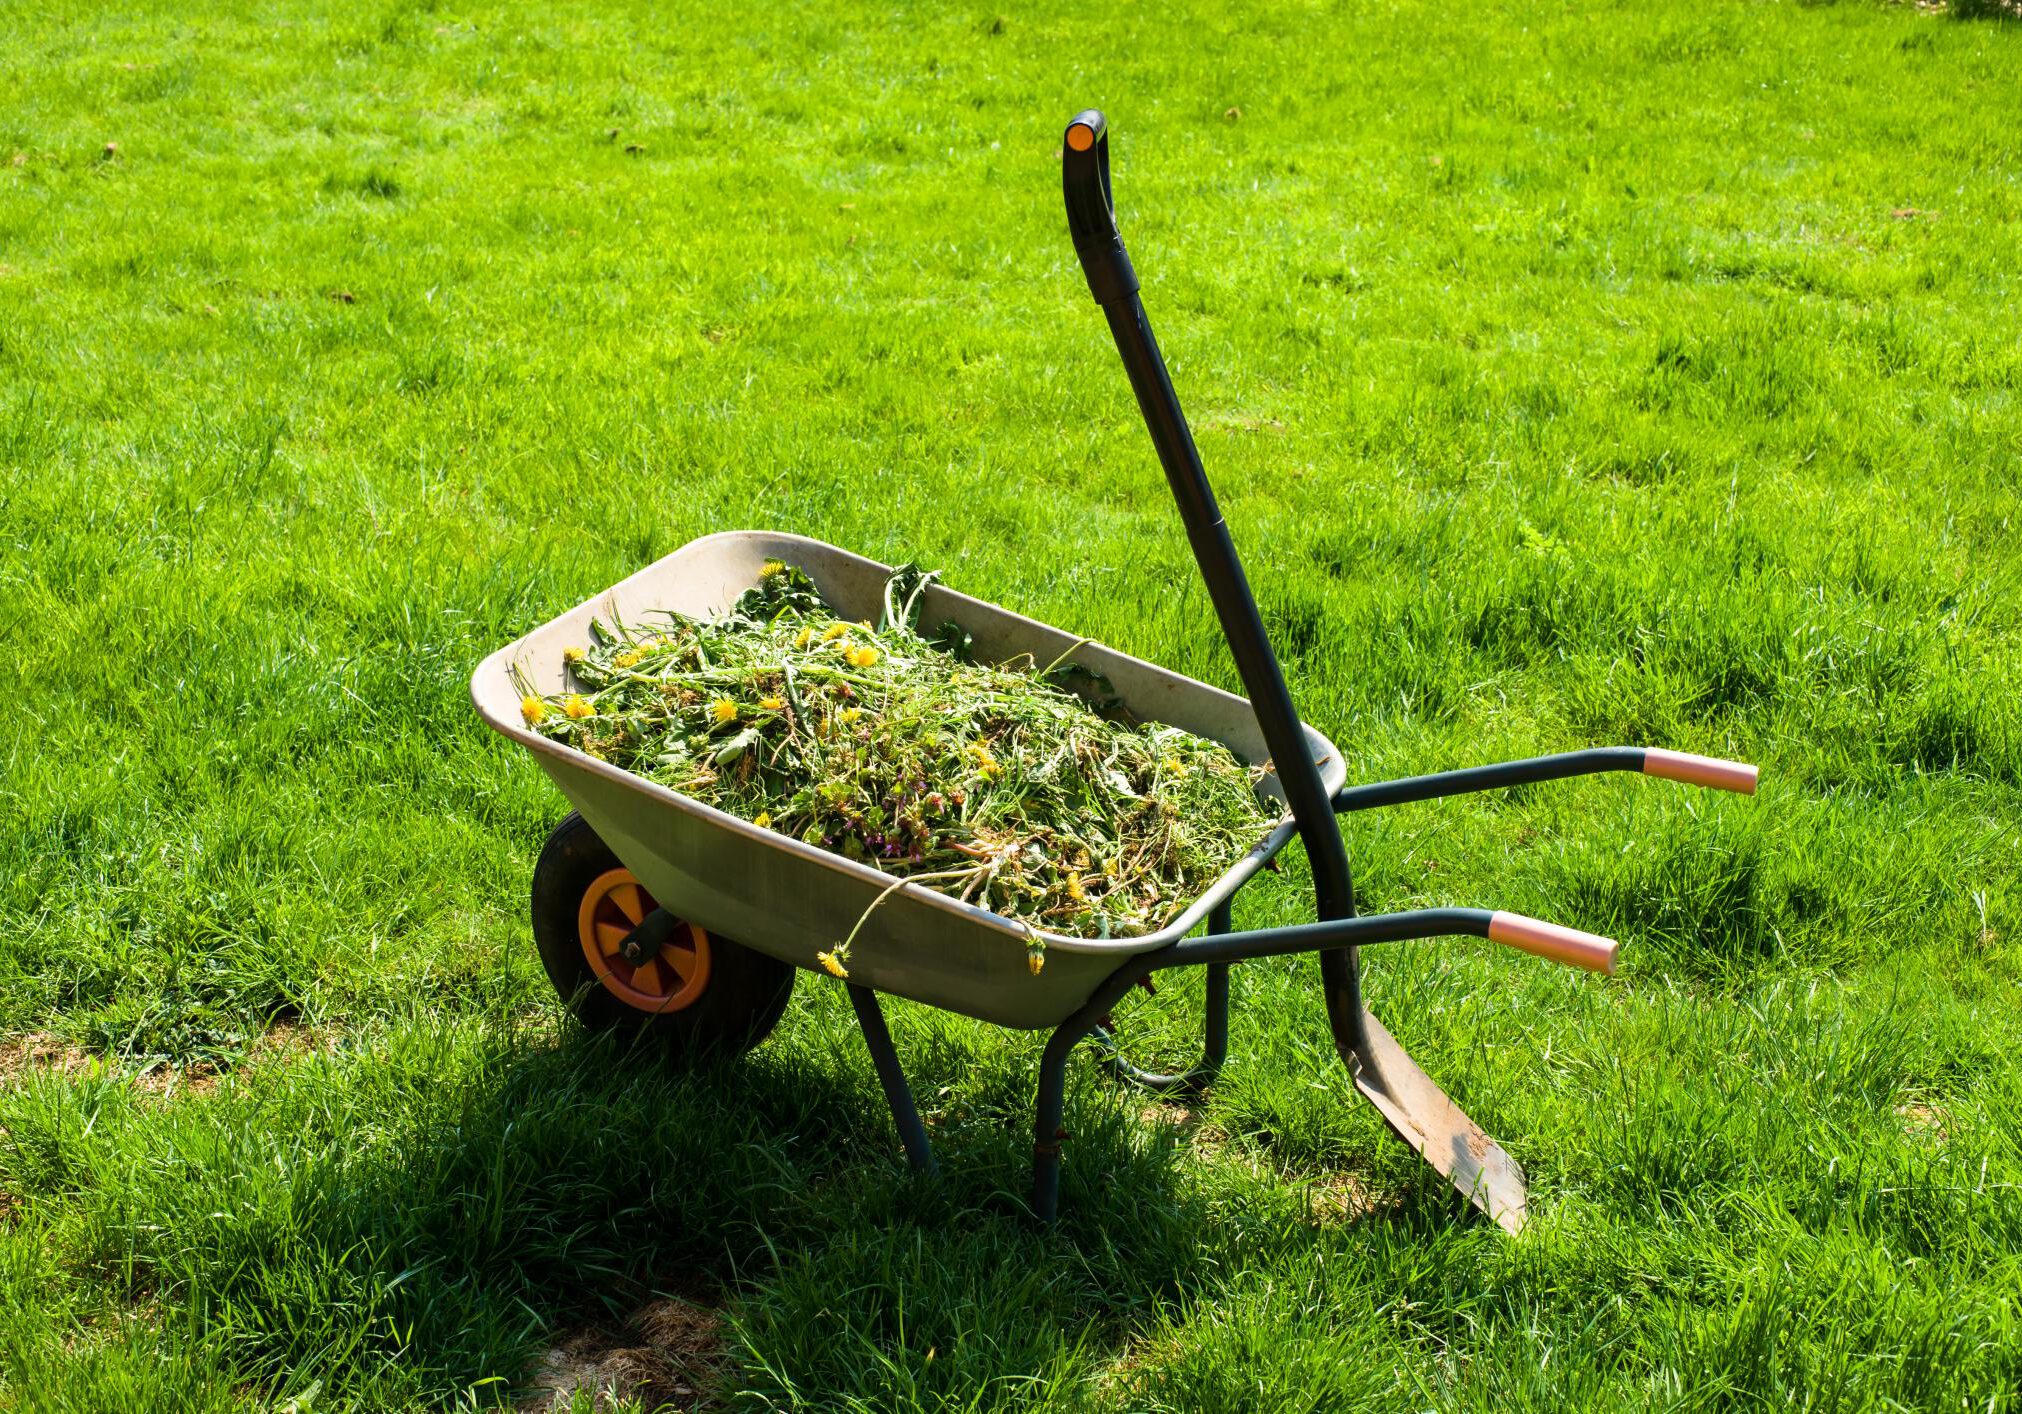 This is a picture of a lawn maintenance.